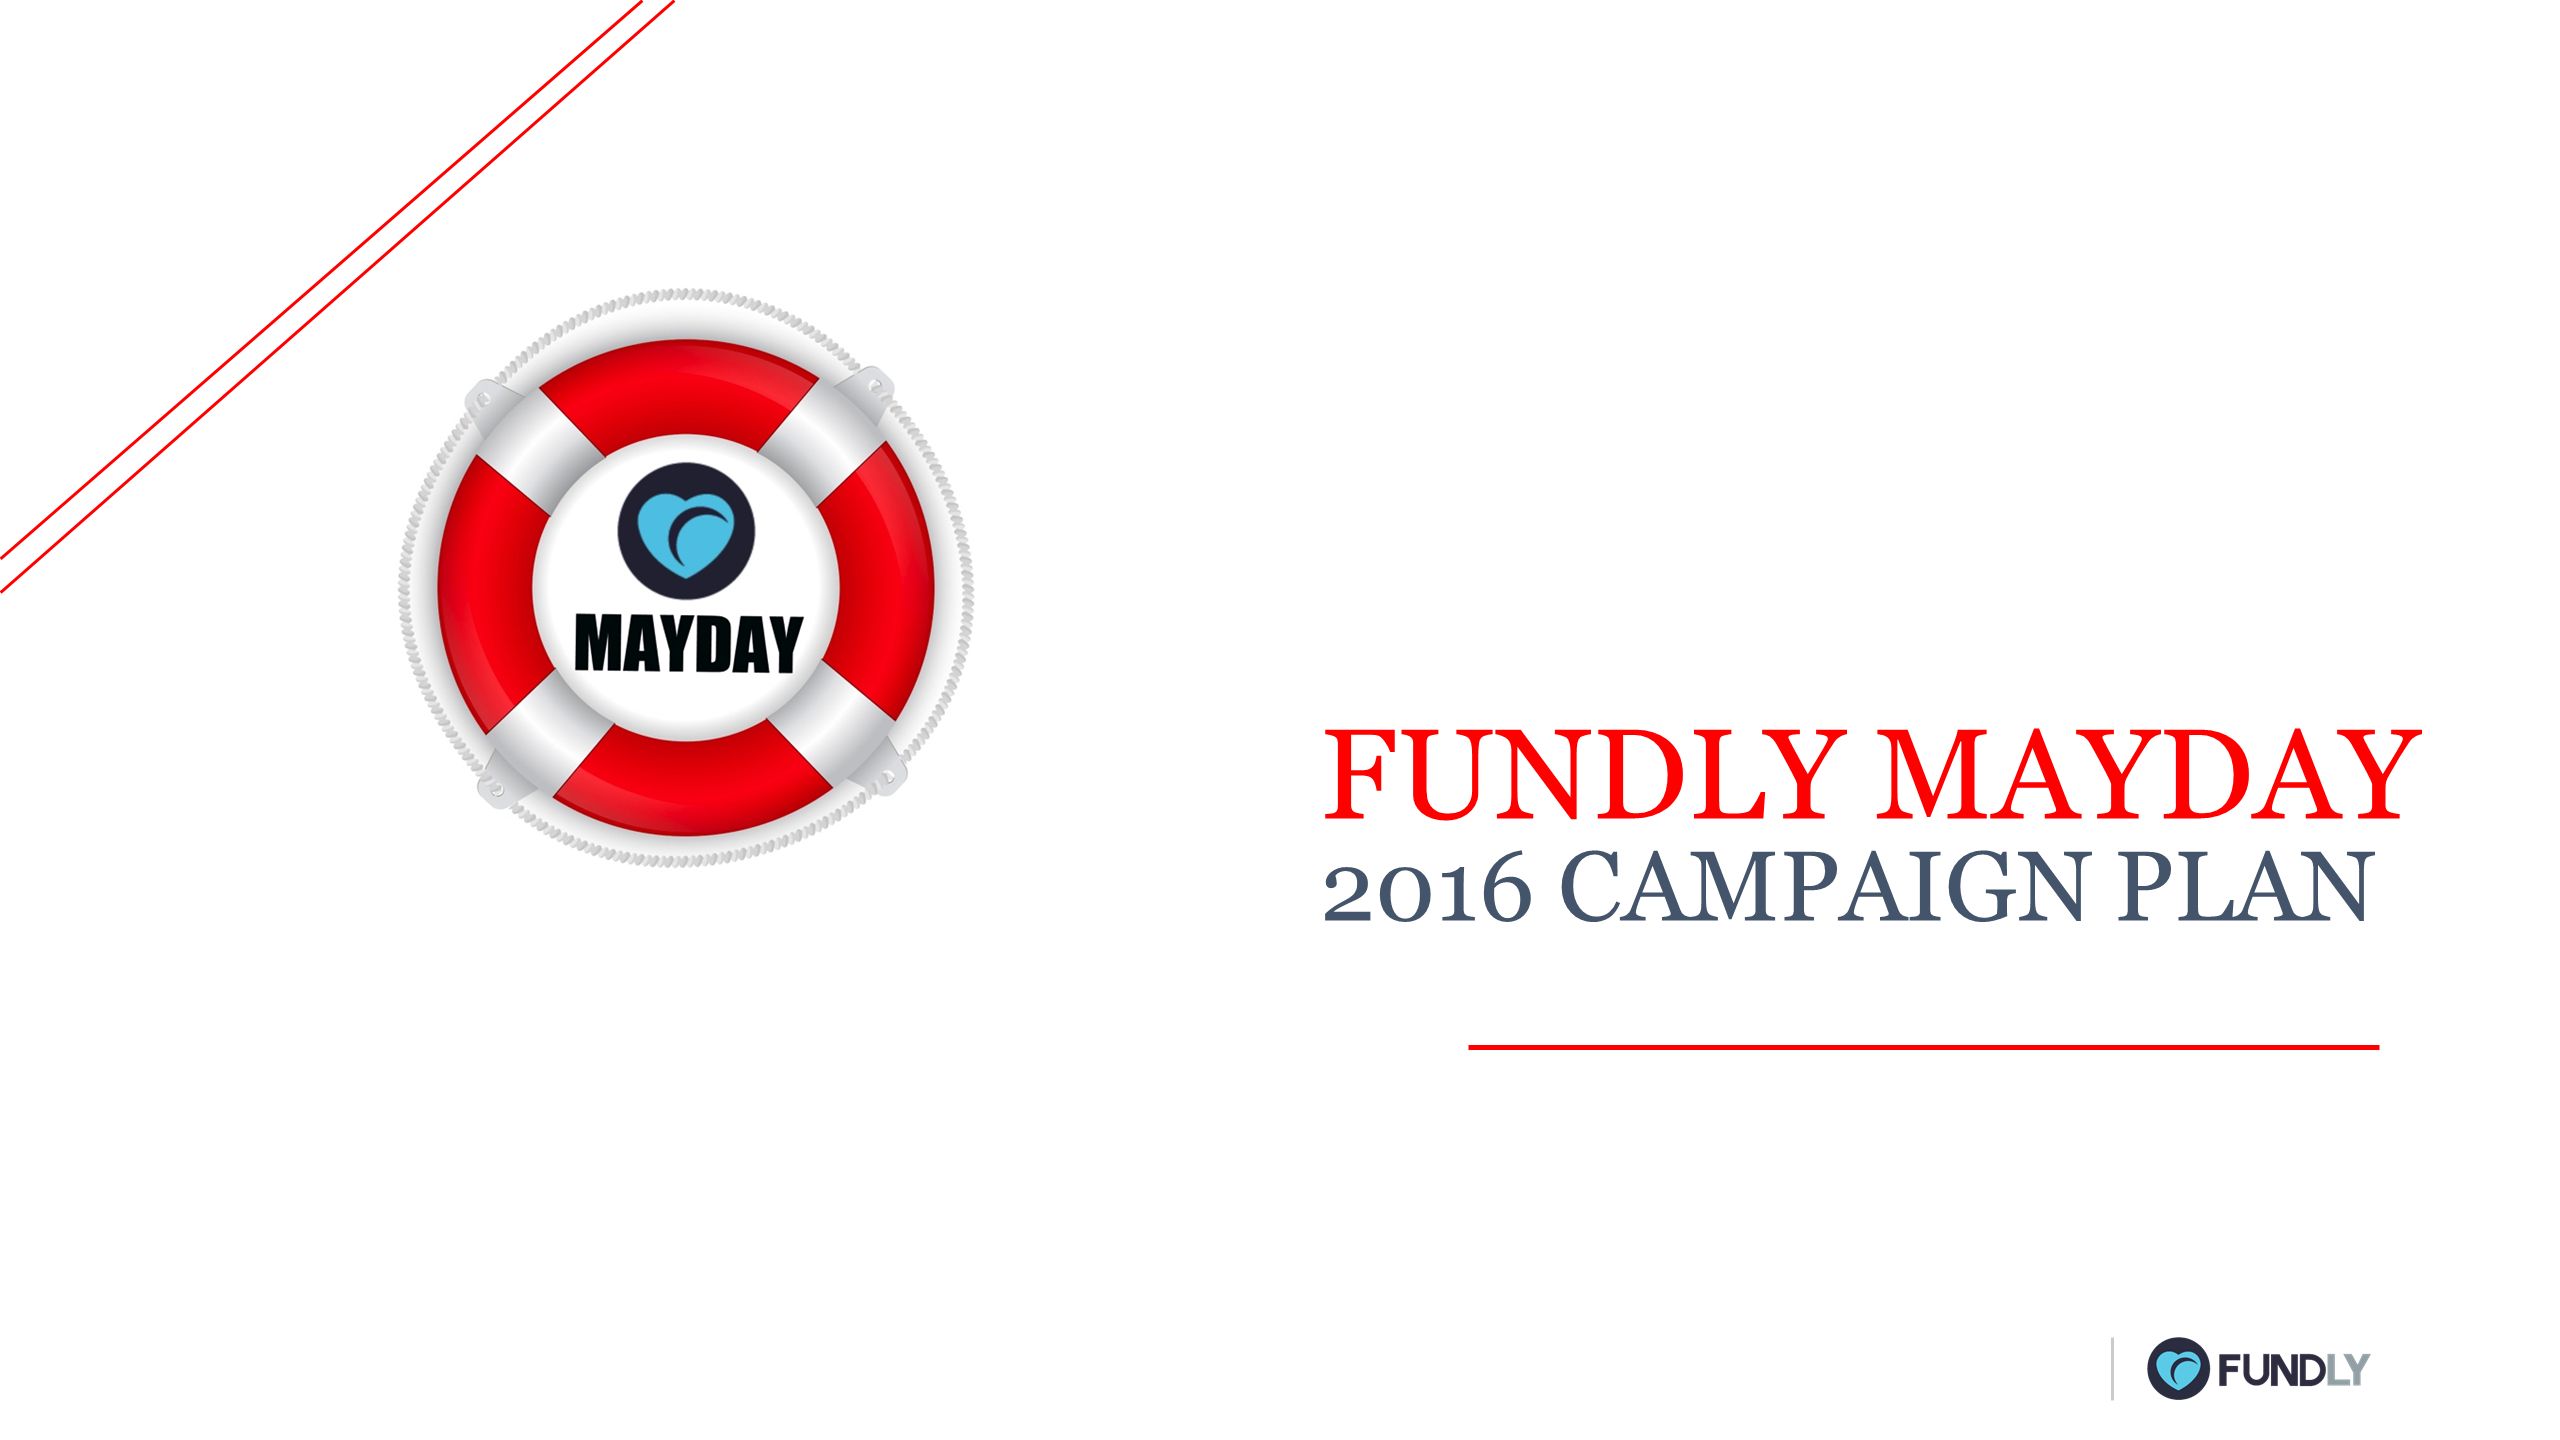 FUNDLY MAYDAY 2016 CAMPAIGN PLAN